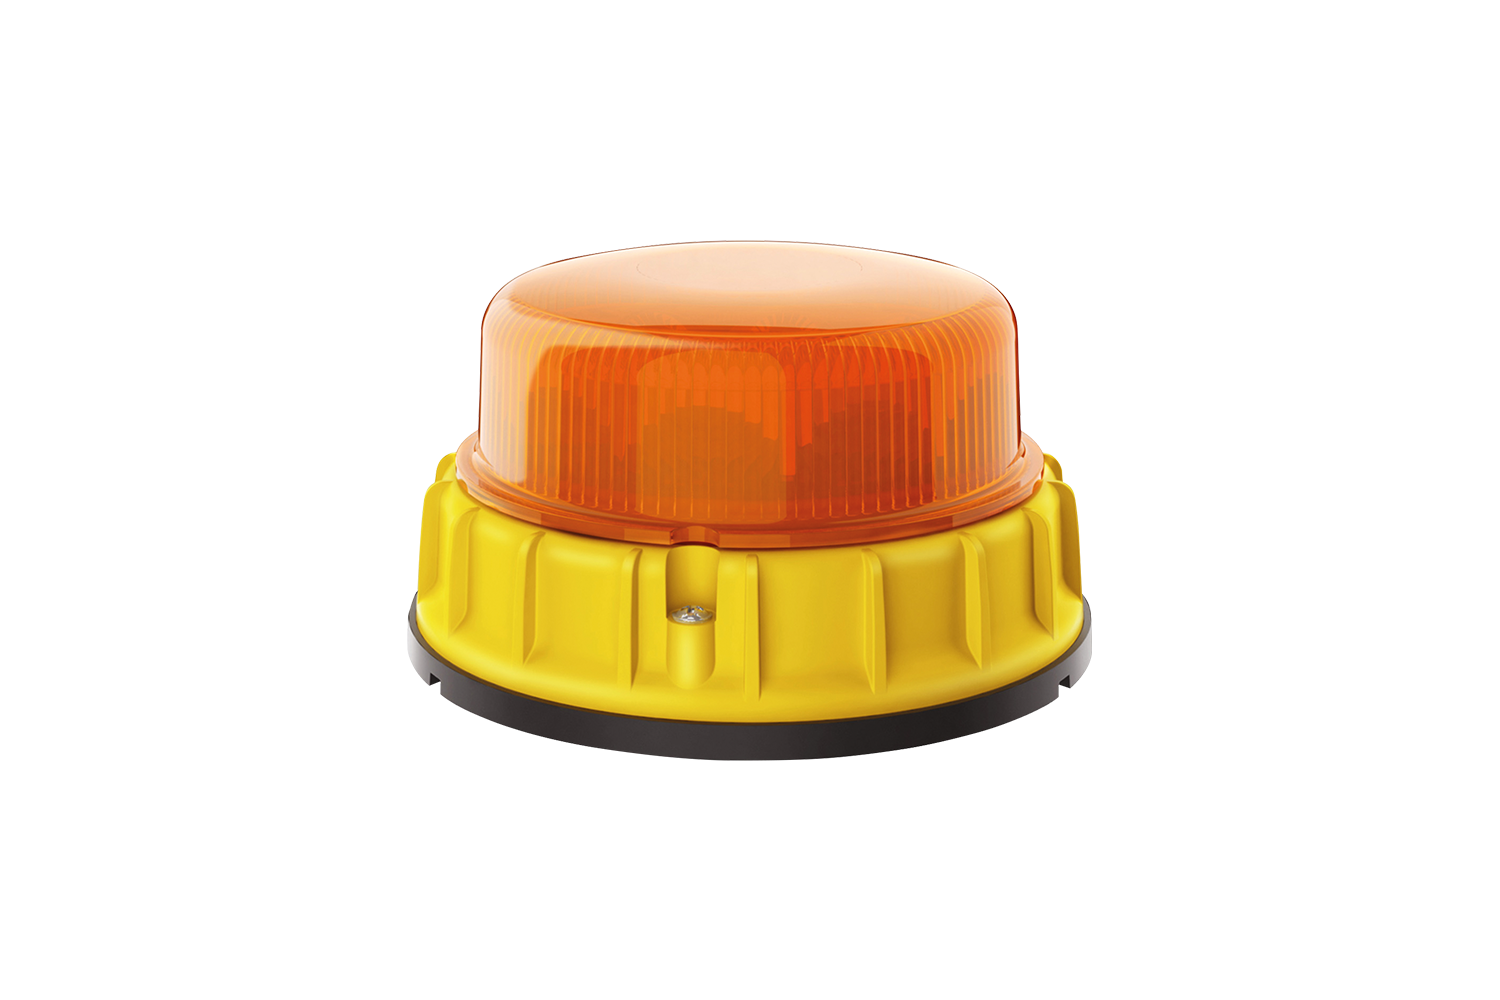 K-LED Mining warning lamp from Hella offered by Patlon